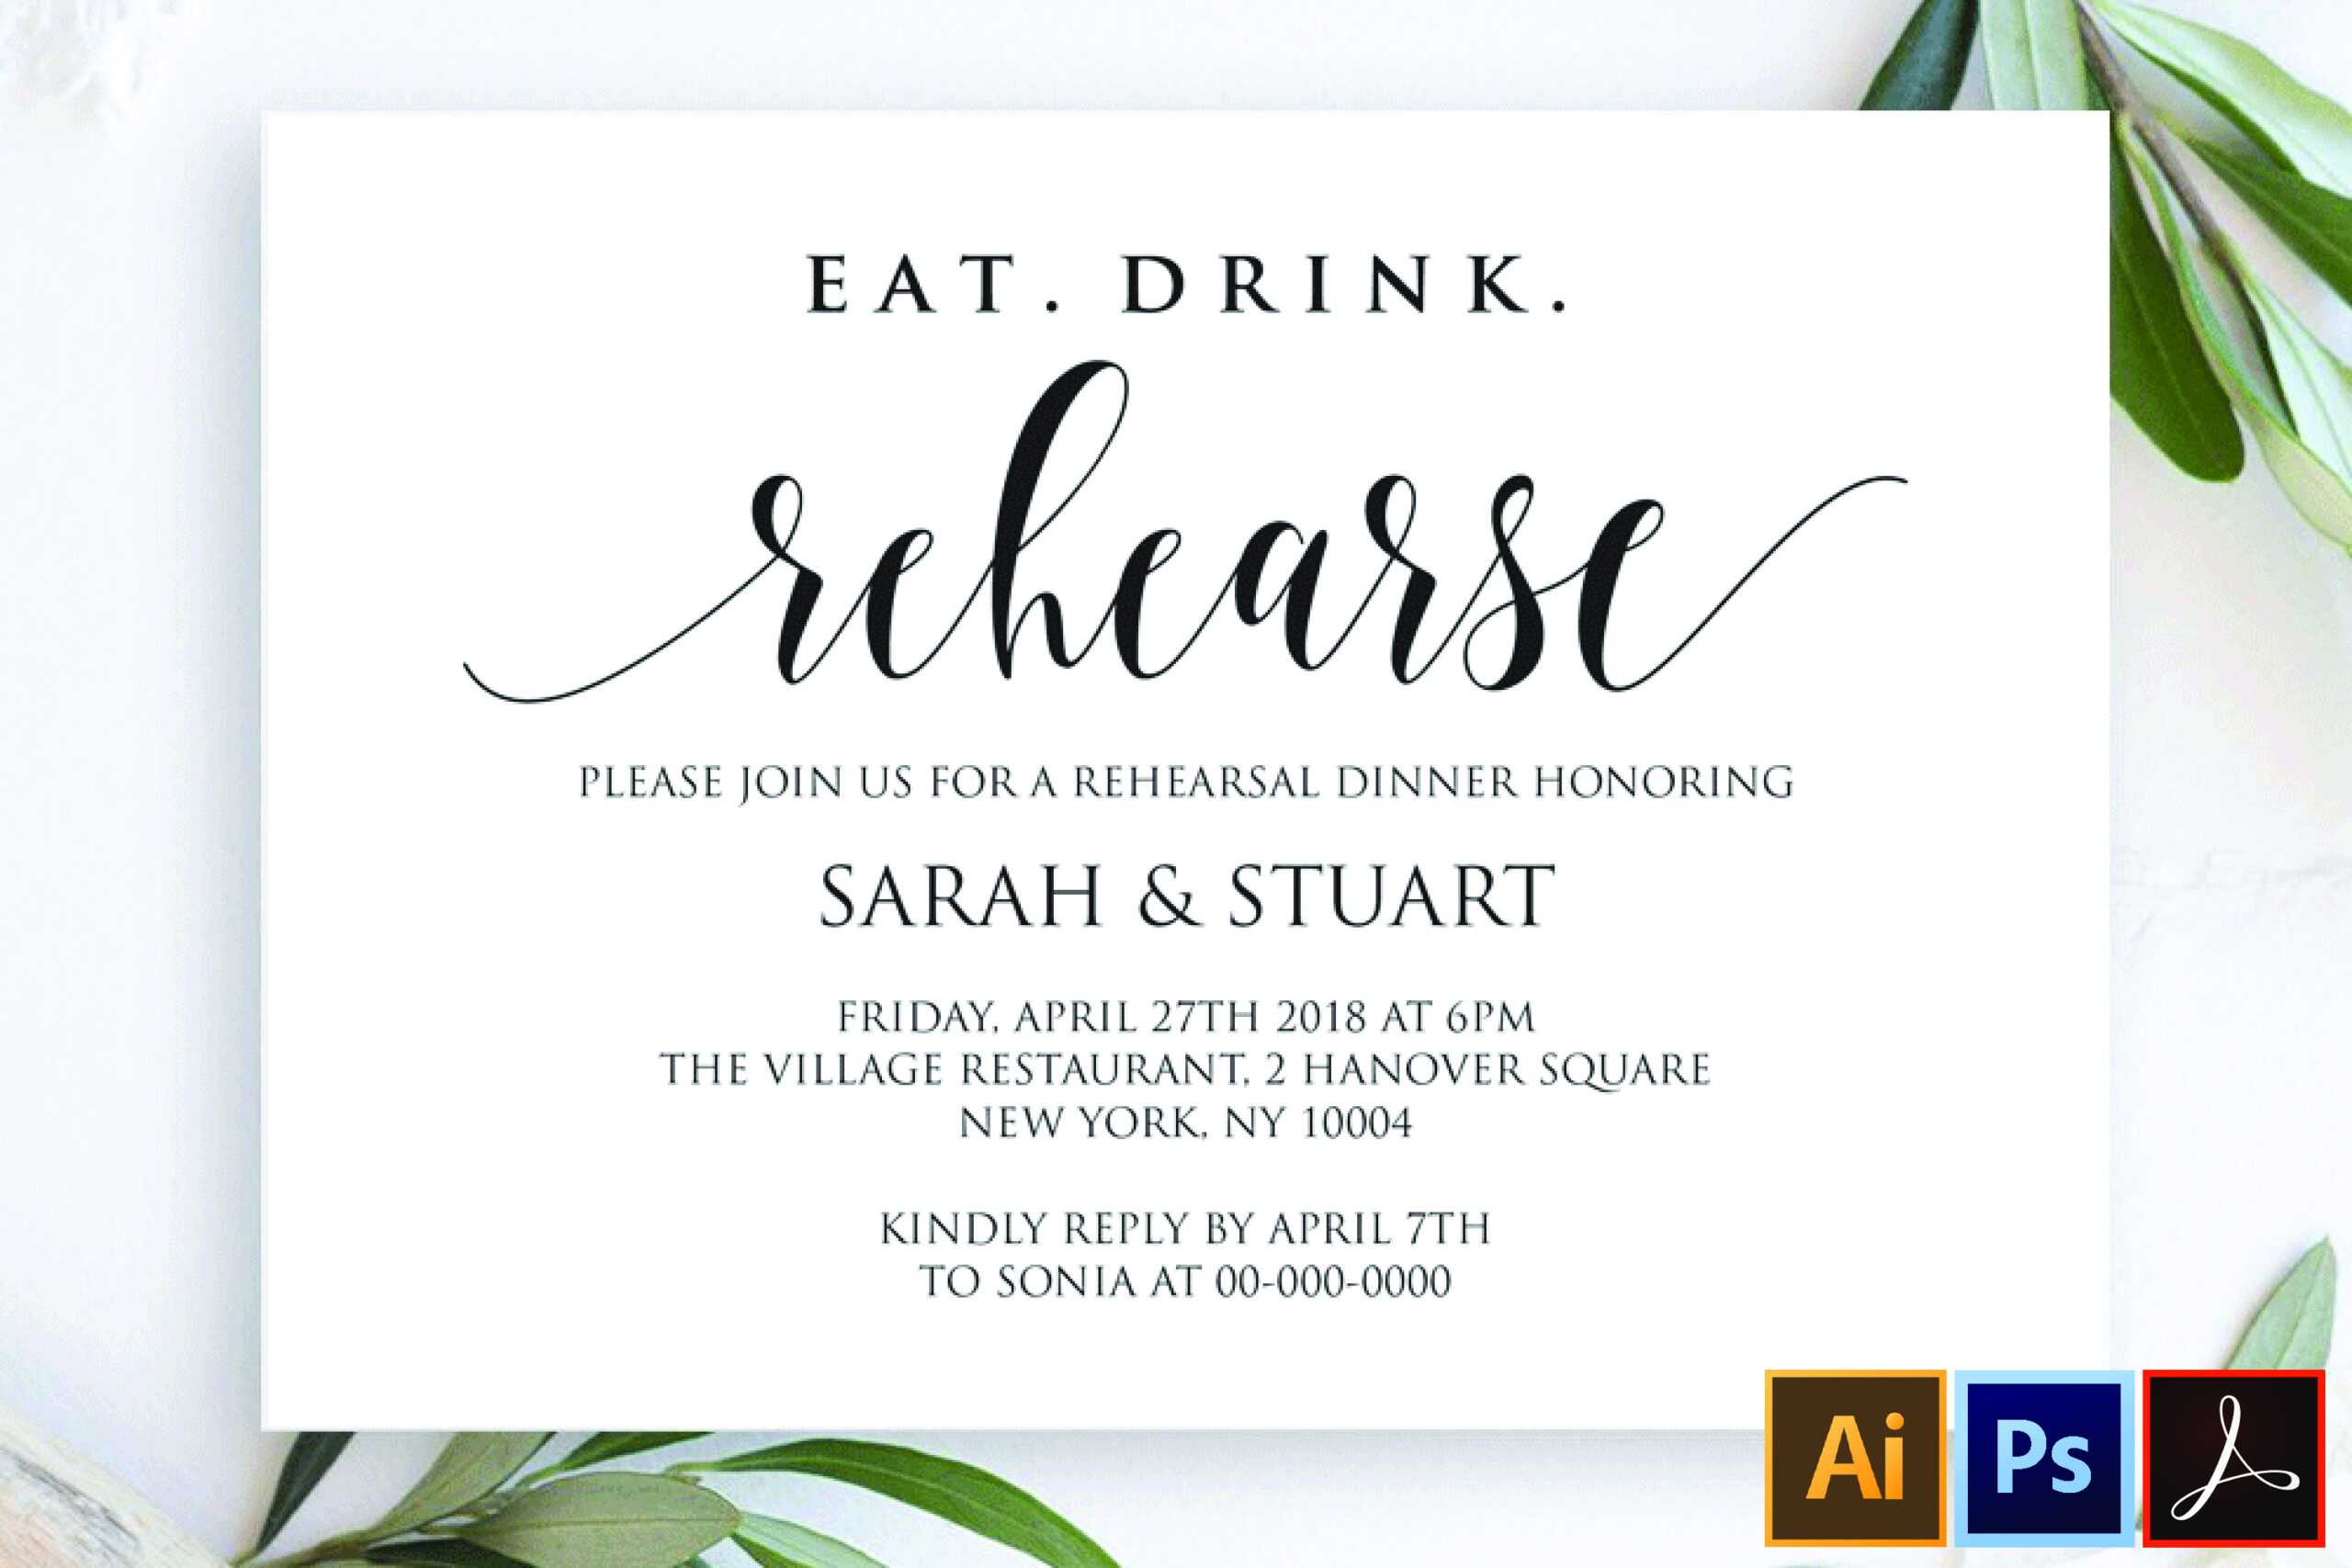 Eat Drink Rehearse Rehearsal Dinner Invitation Template In Frequent Diner Card Template